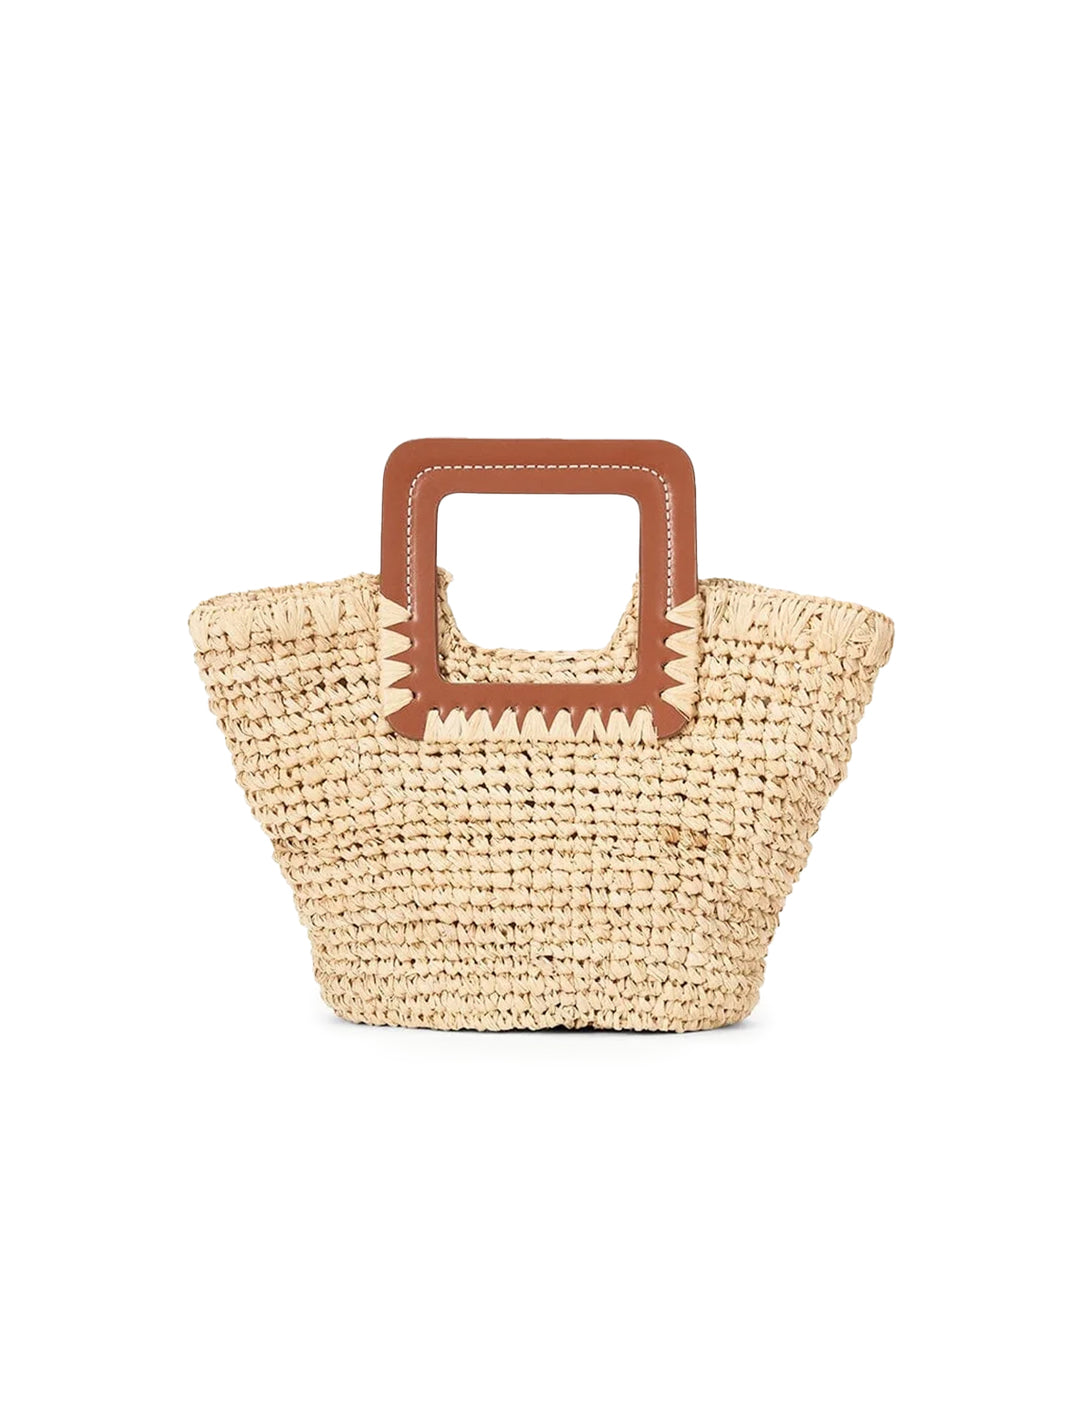 Front view of STAUD's shirley mini bucket in natural.